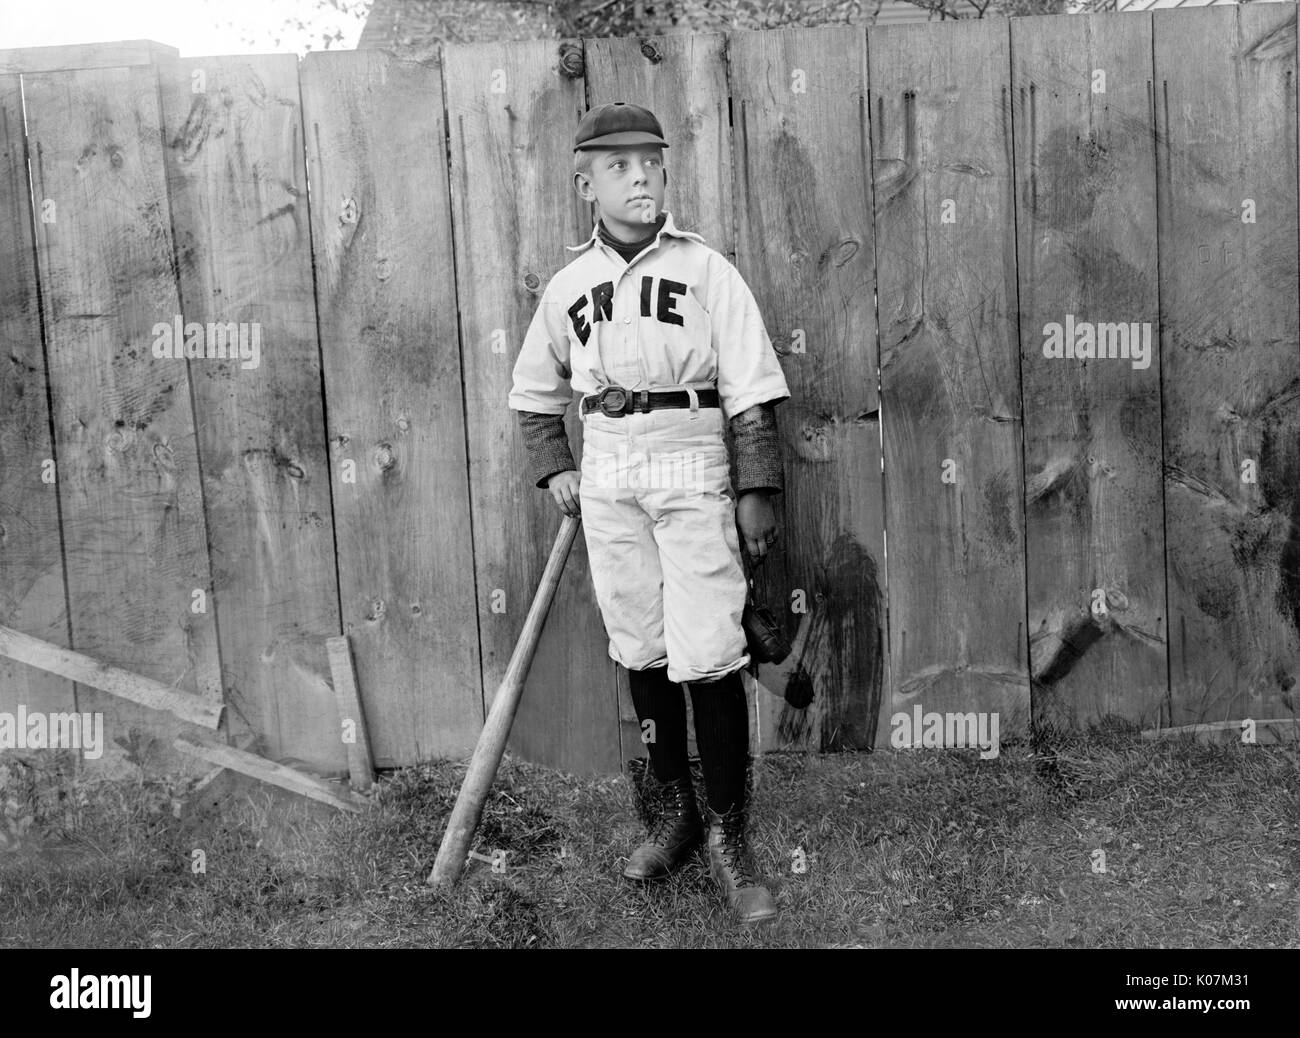 A boy in baseball uniform by a fence in America     Date: circa 1910 Stock Photo